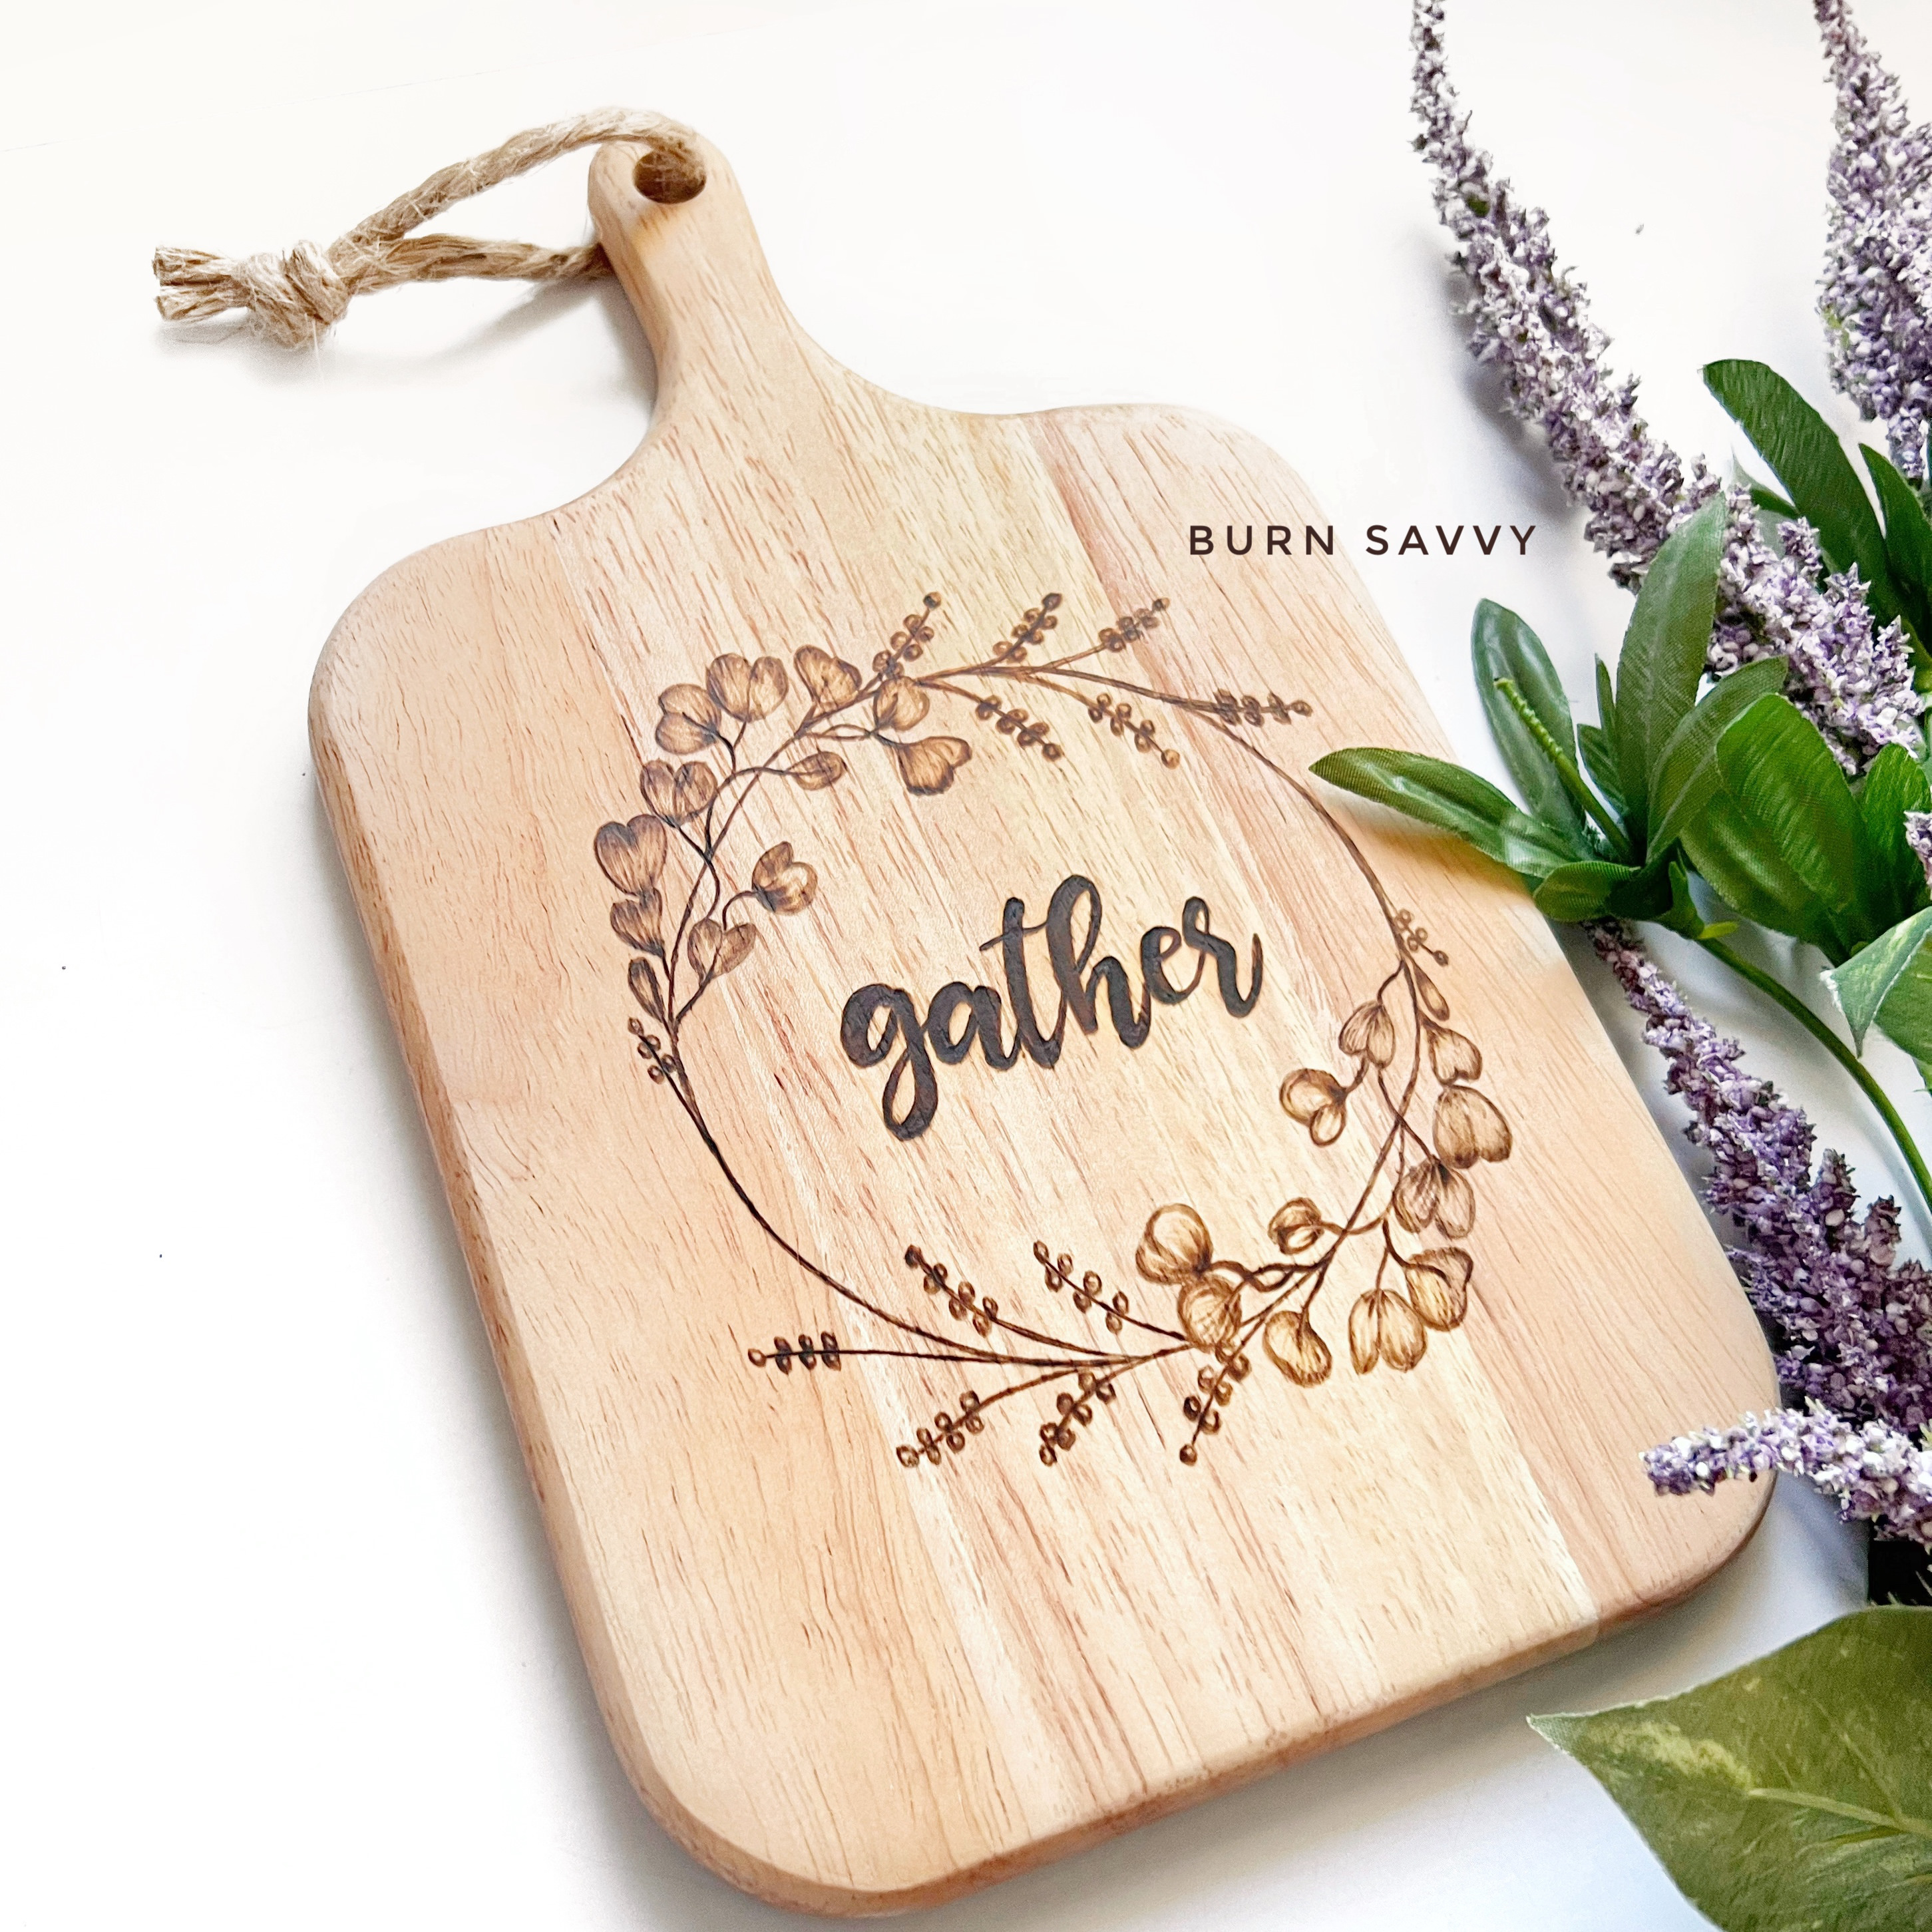 Wood Burned Gather charcuterie cheese board crate club project